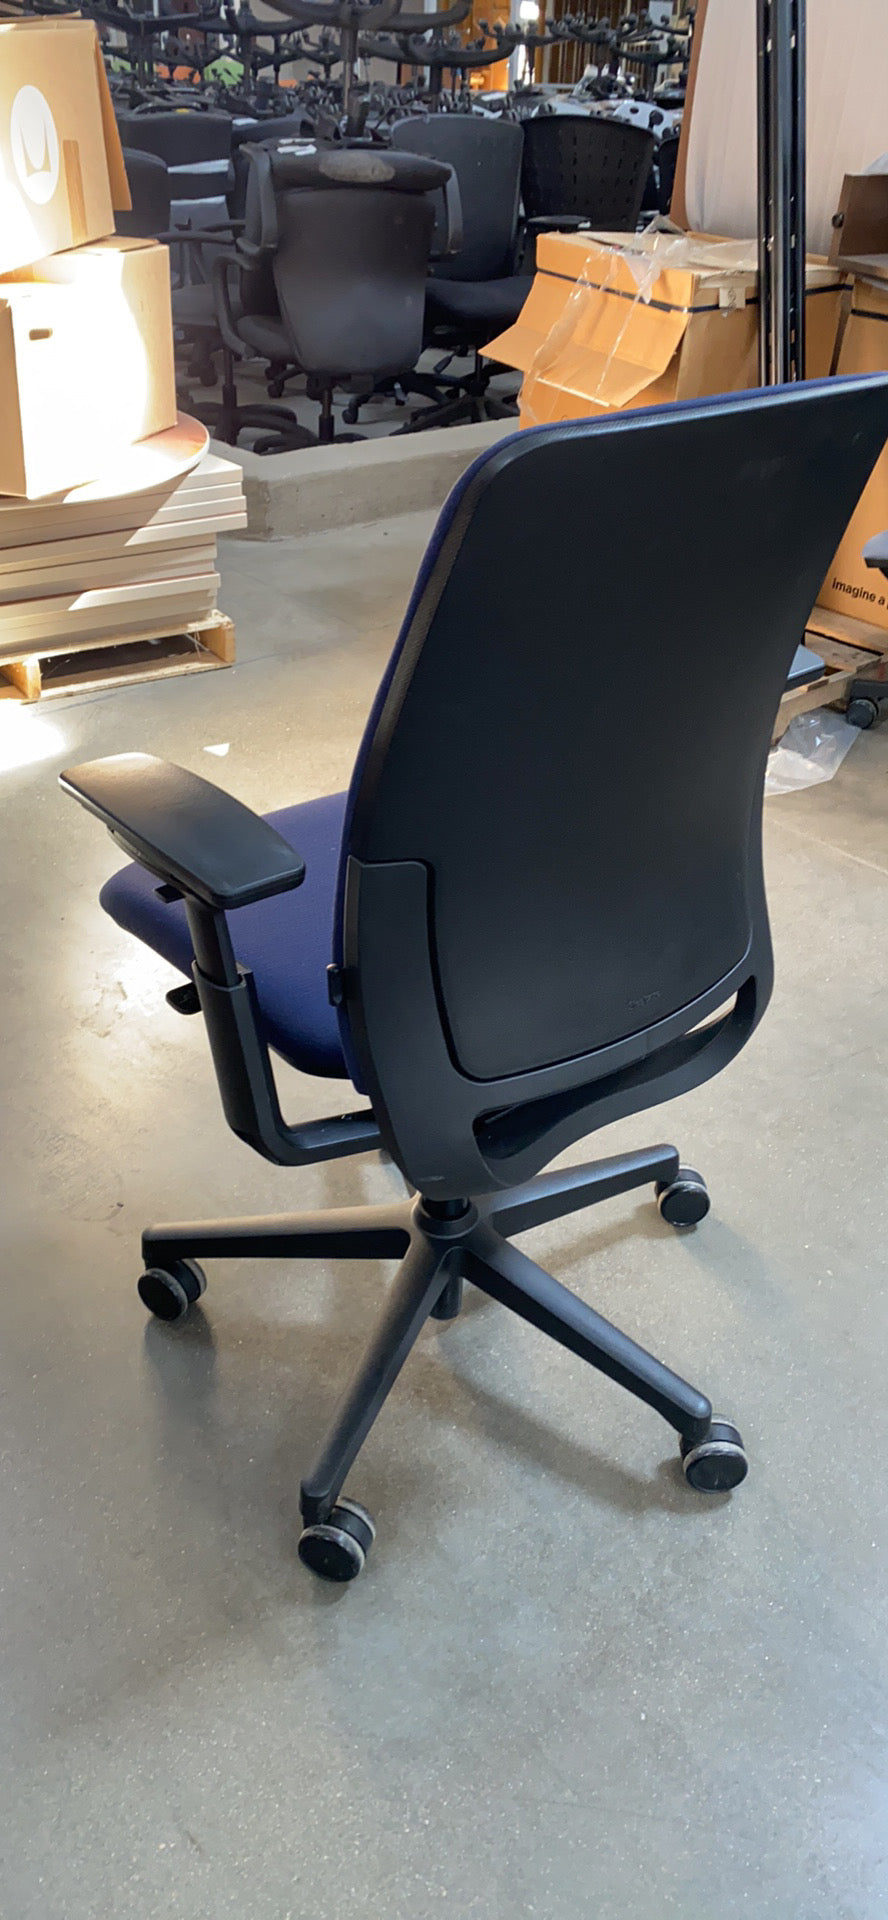 Load image into Gallery viewer, Side view of Steelcase Amia chair in light blue
